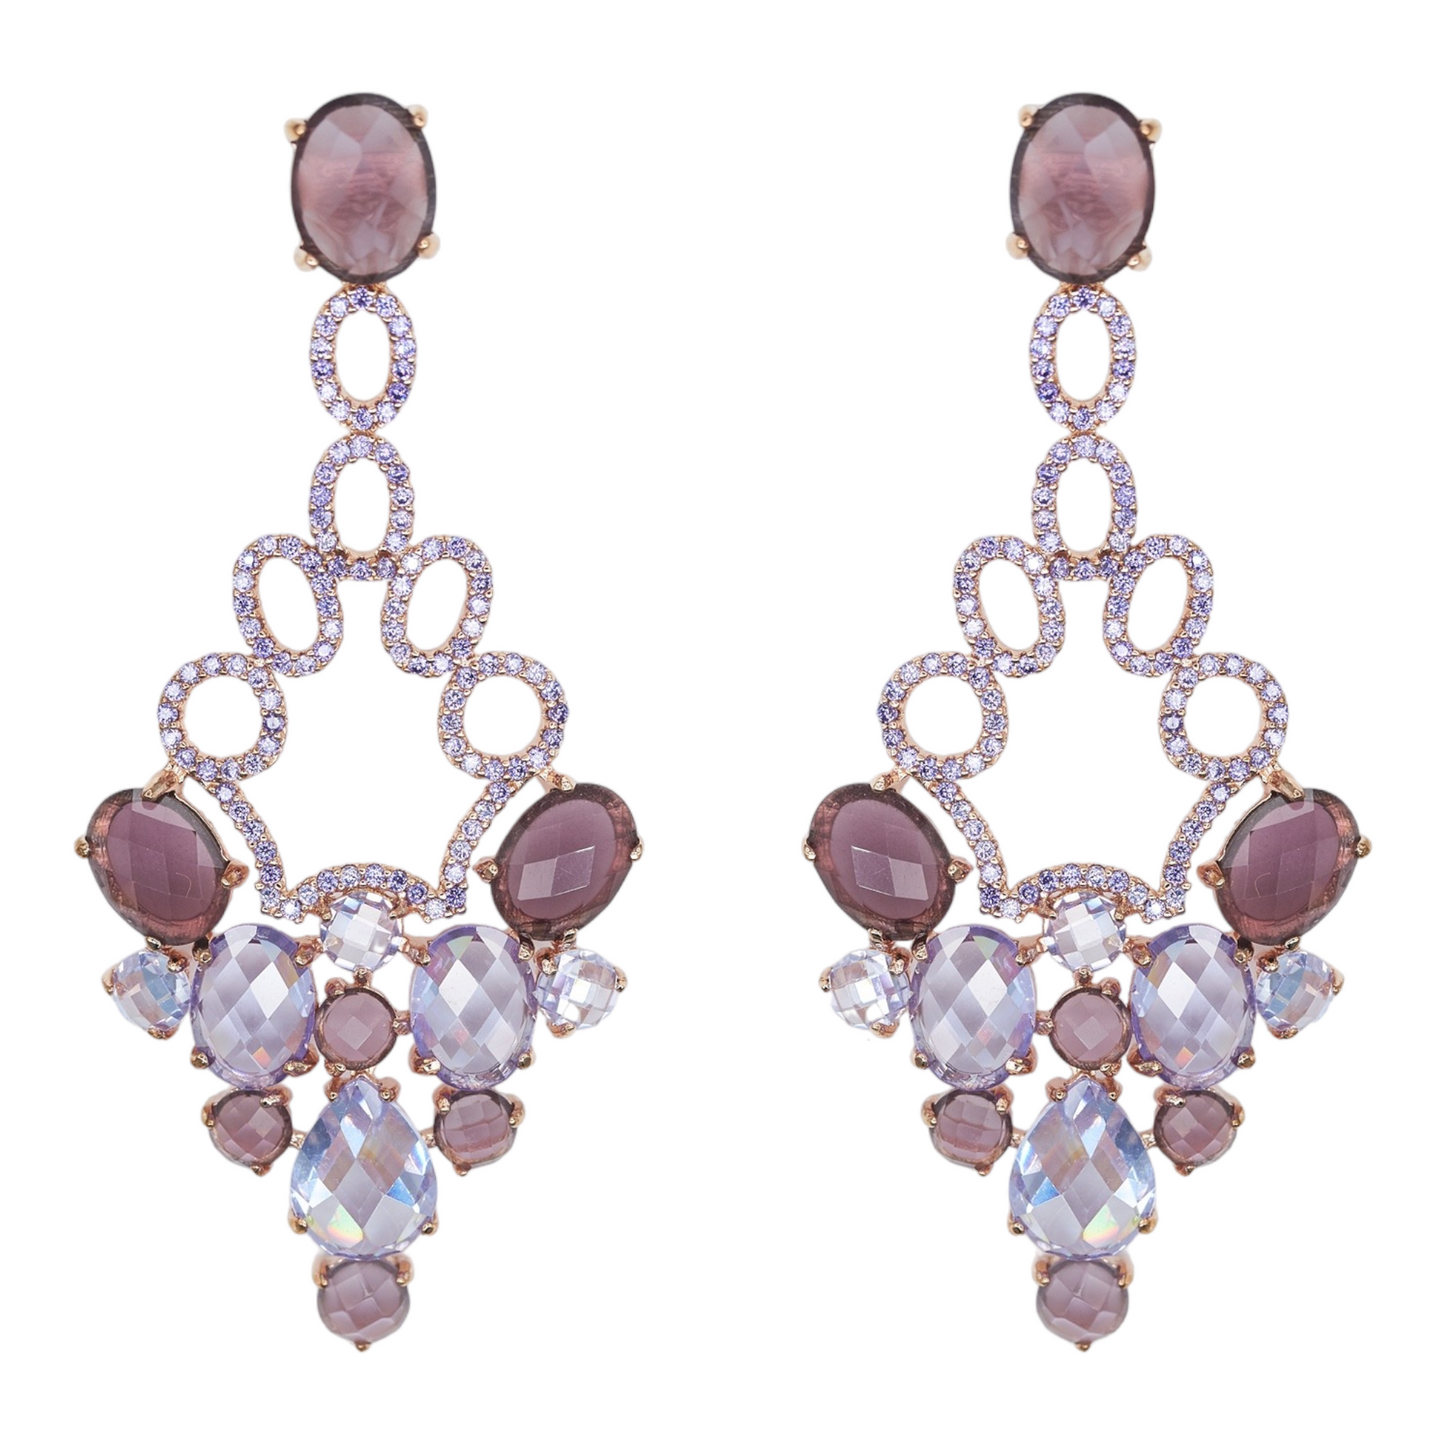 Lavender Stones and Gems Rose Gold Statement Earrings